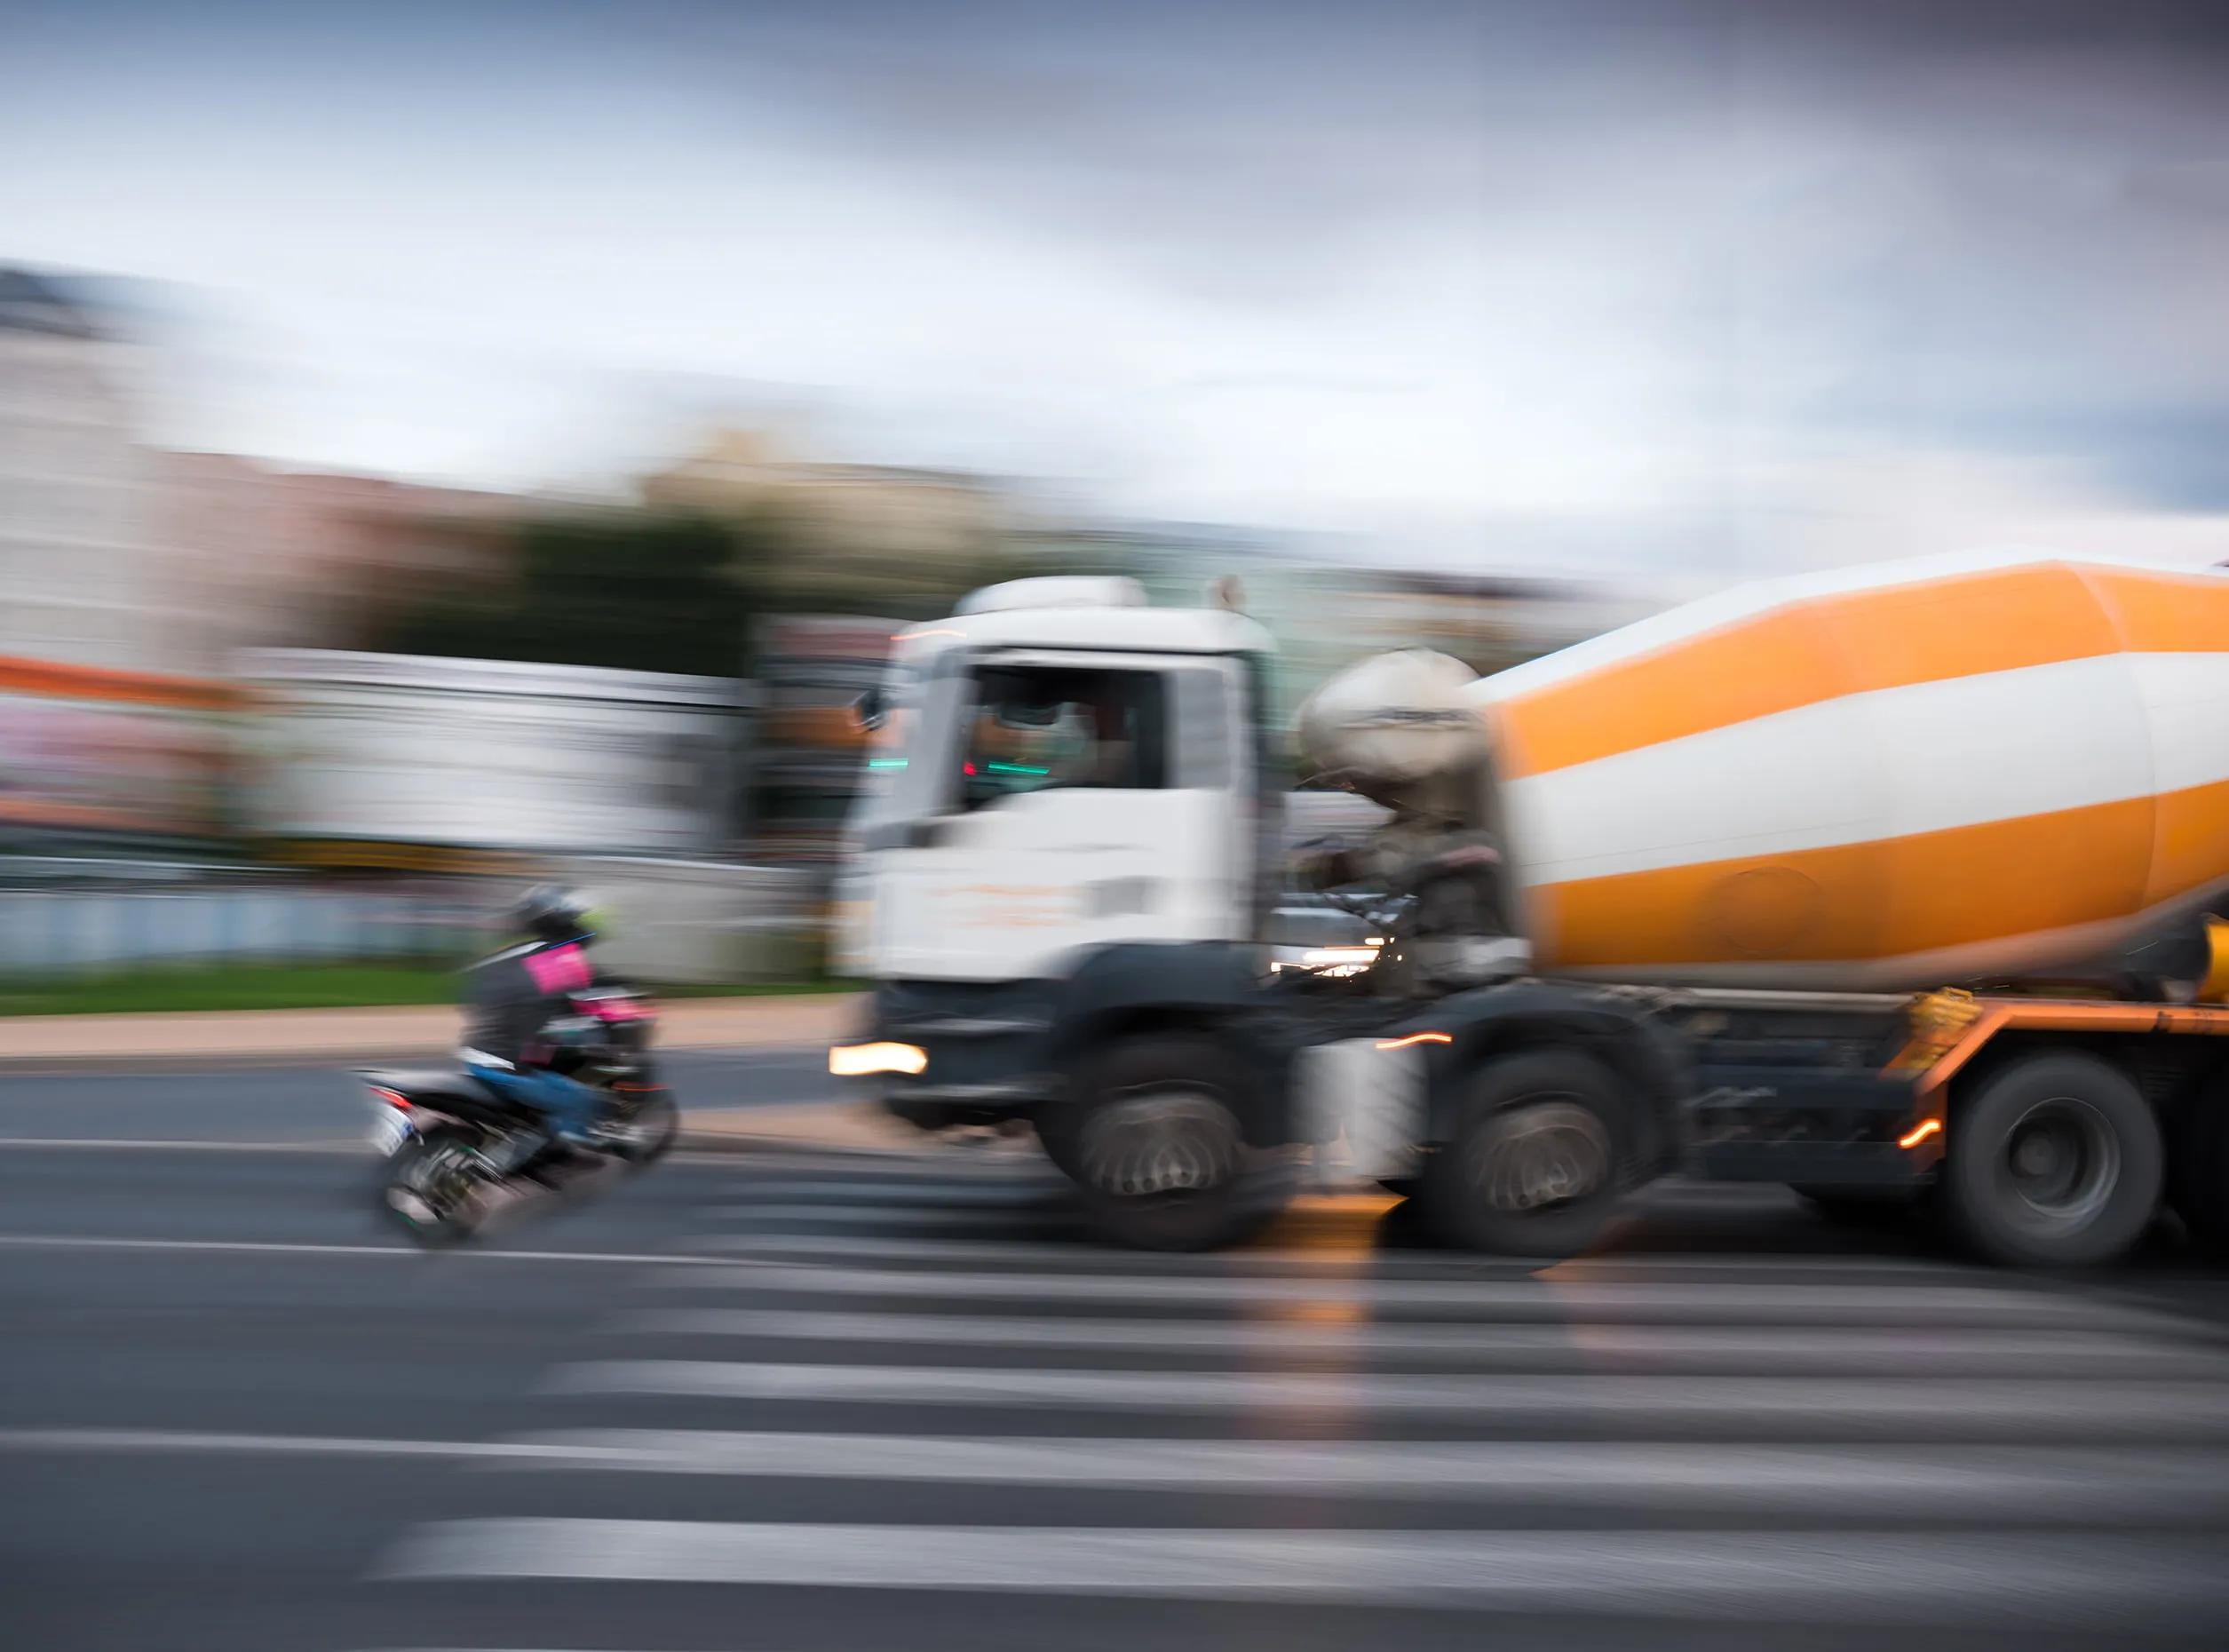 Blurry photo of motorcycle and truck about the get into a collision. Truck accidents can be devastating, but our truck accident lawyers won’t rest until you get the compensation you deserve.